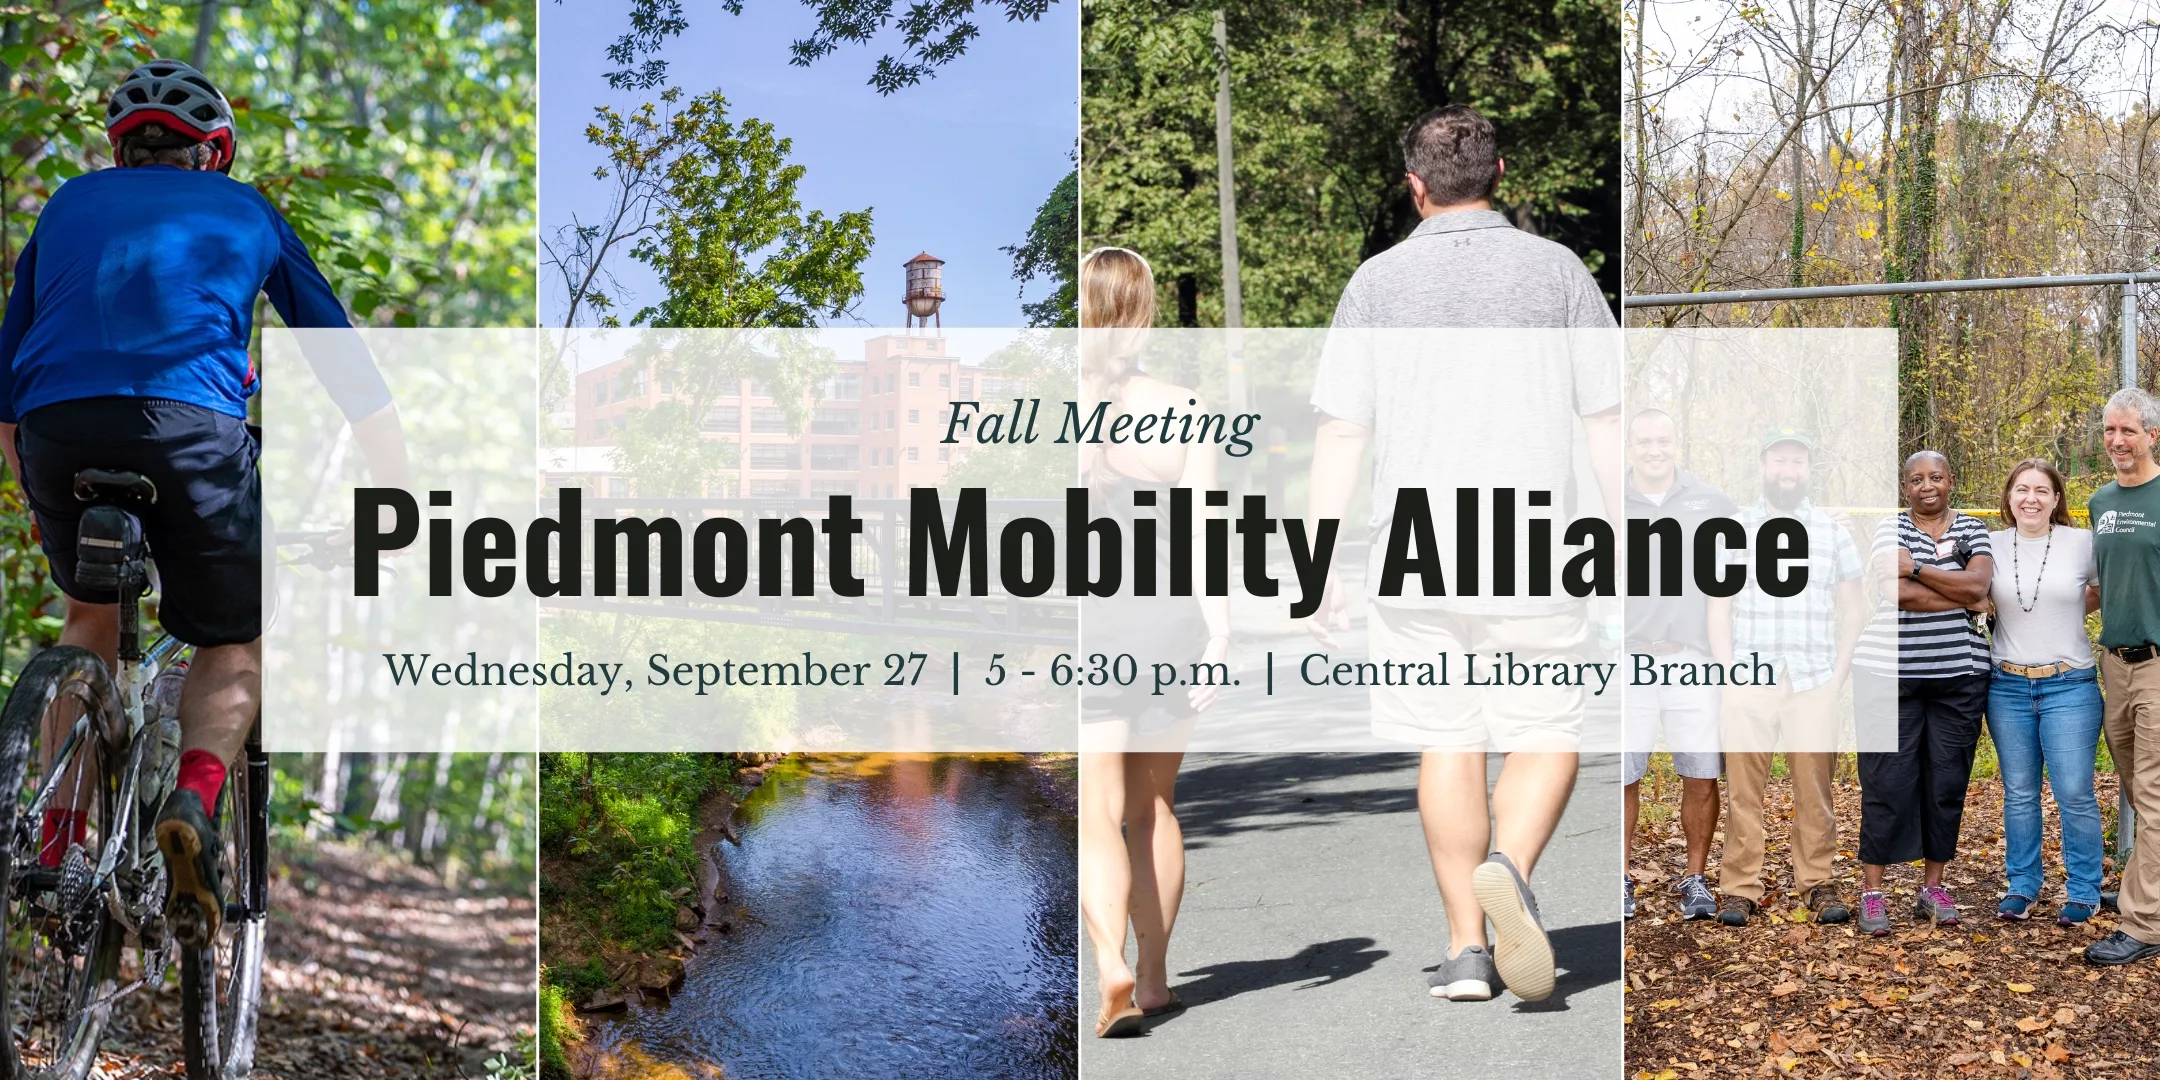 Fall Meeting Piedmont Mobility Alliance Wednesday, September 27 | 5 - 6:30 p.m. | Central Library Branch